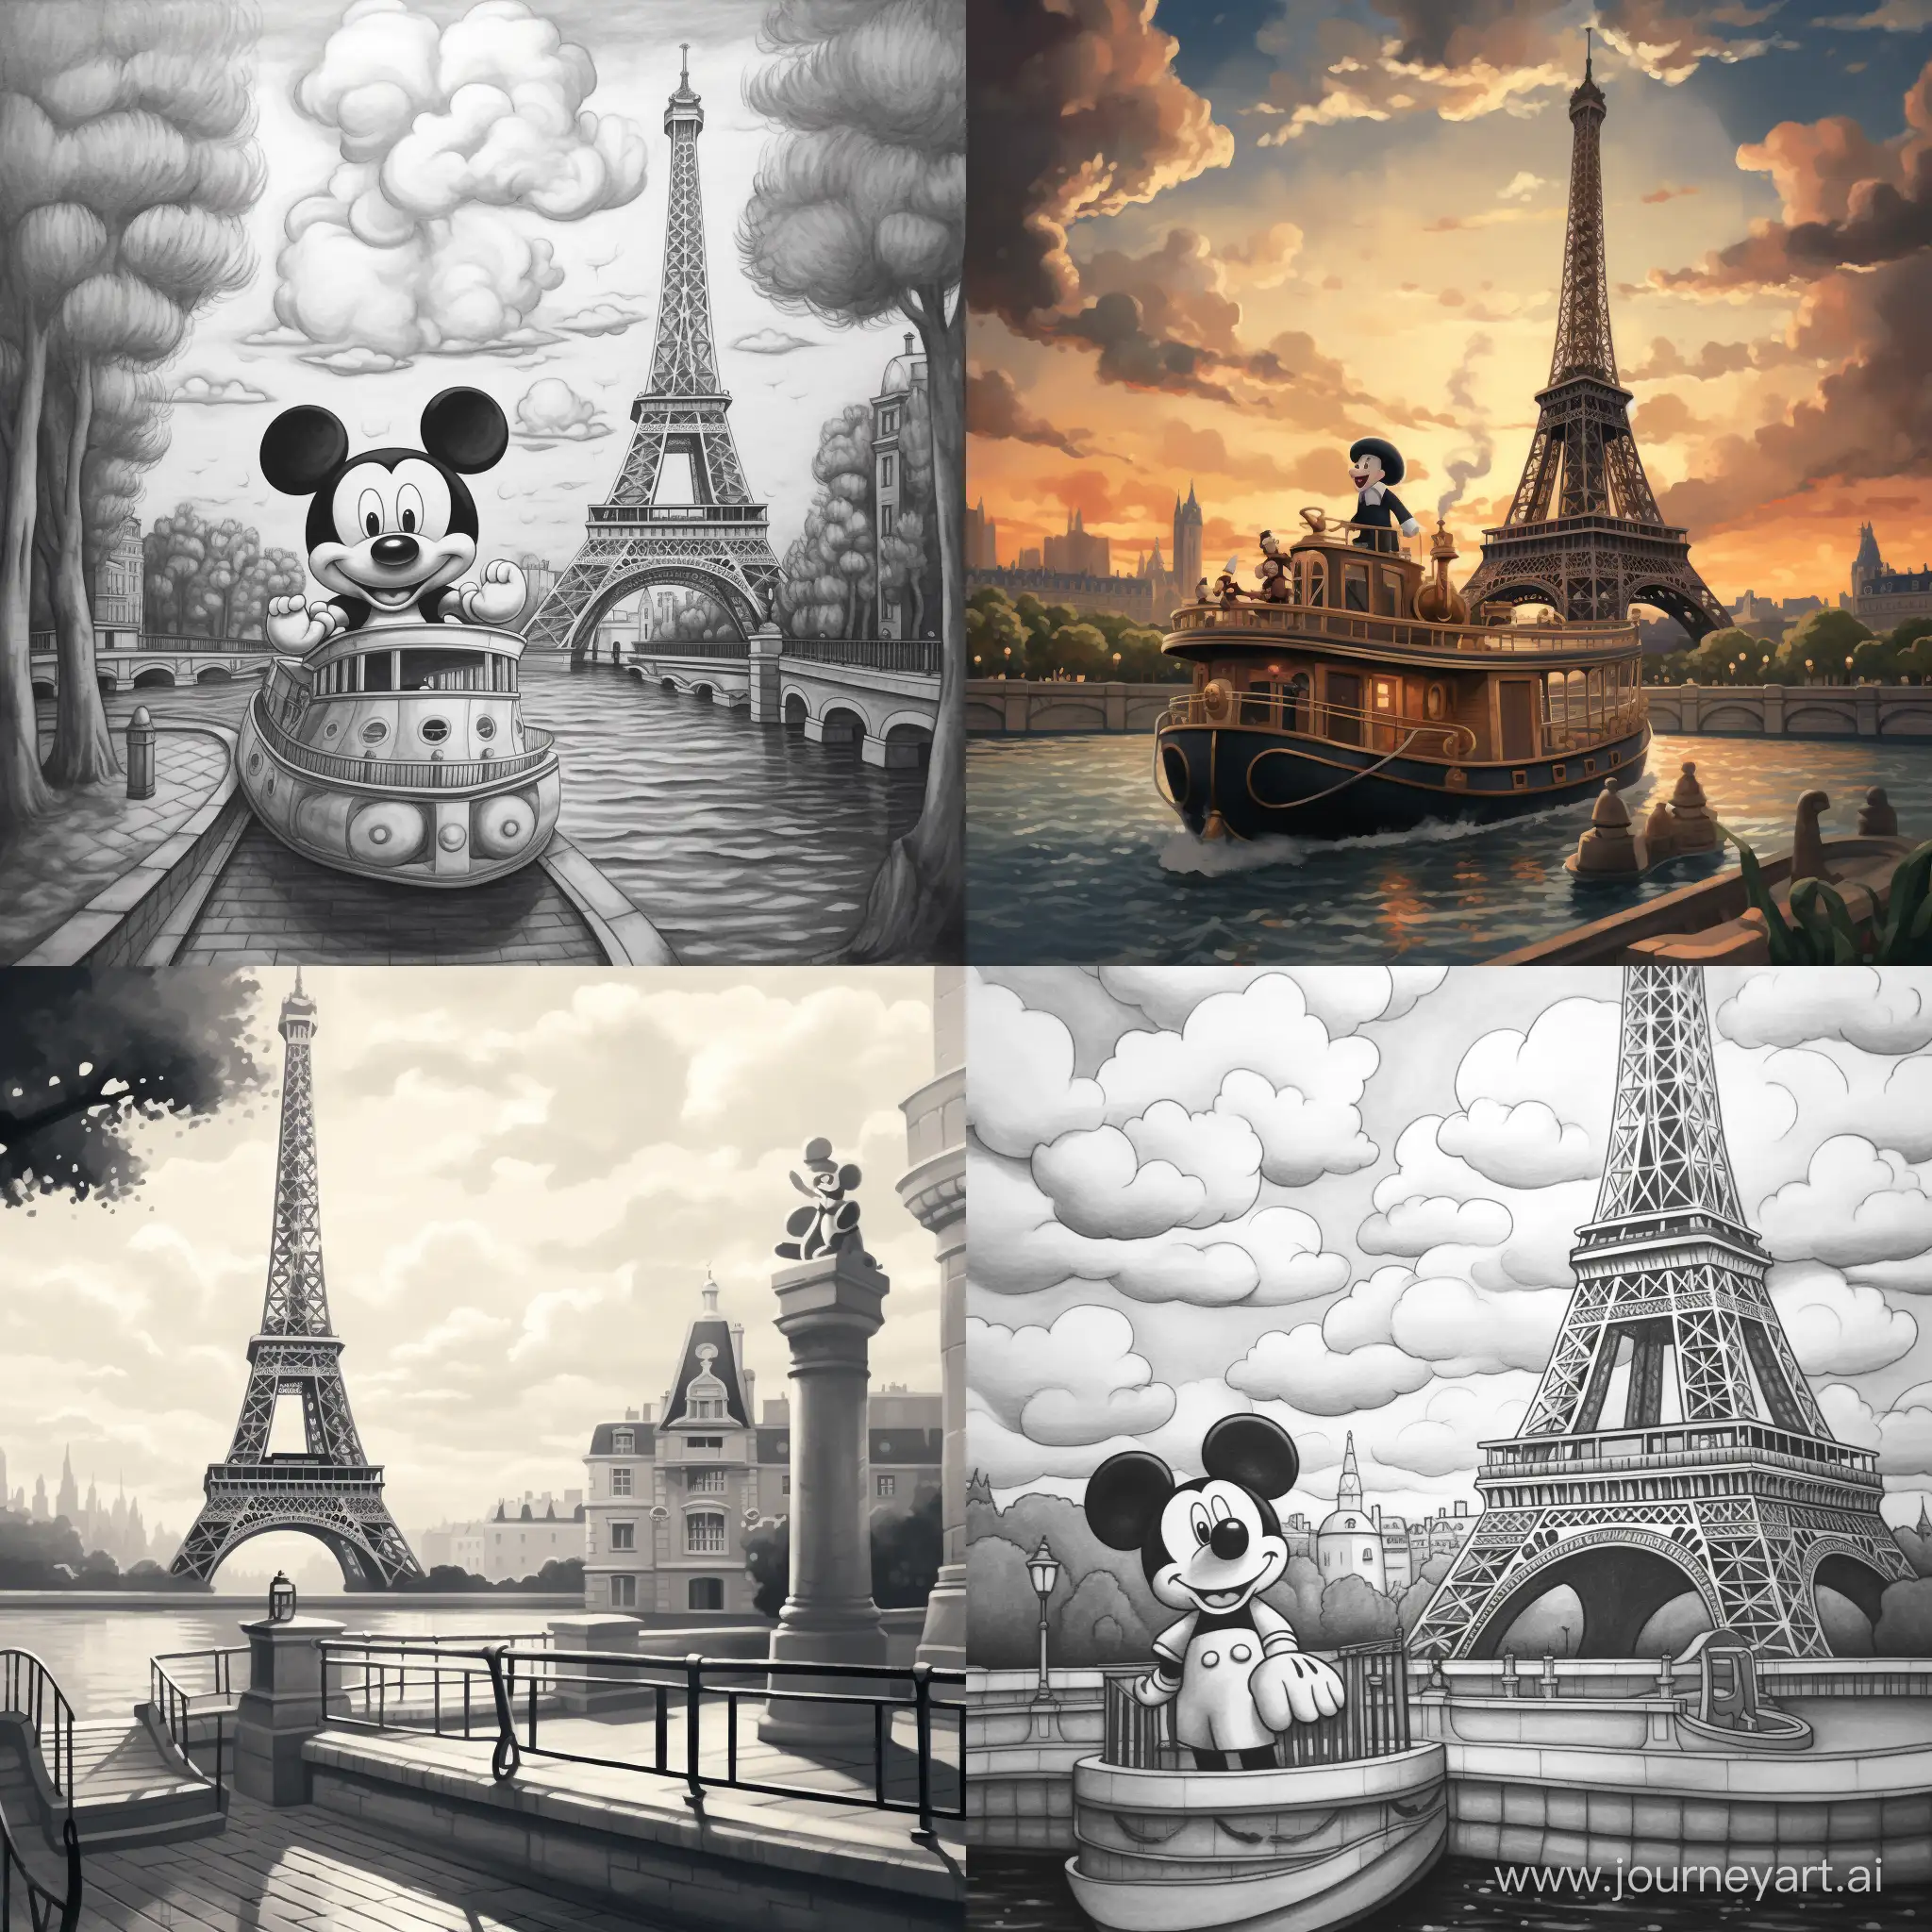 Steamboat-Willie-Explores-Paris-in-a-Whimsical-Adventure